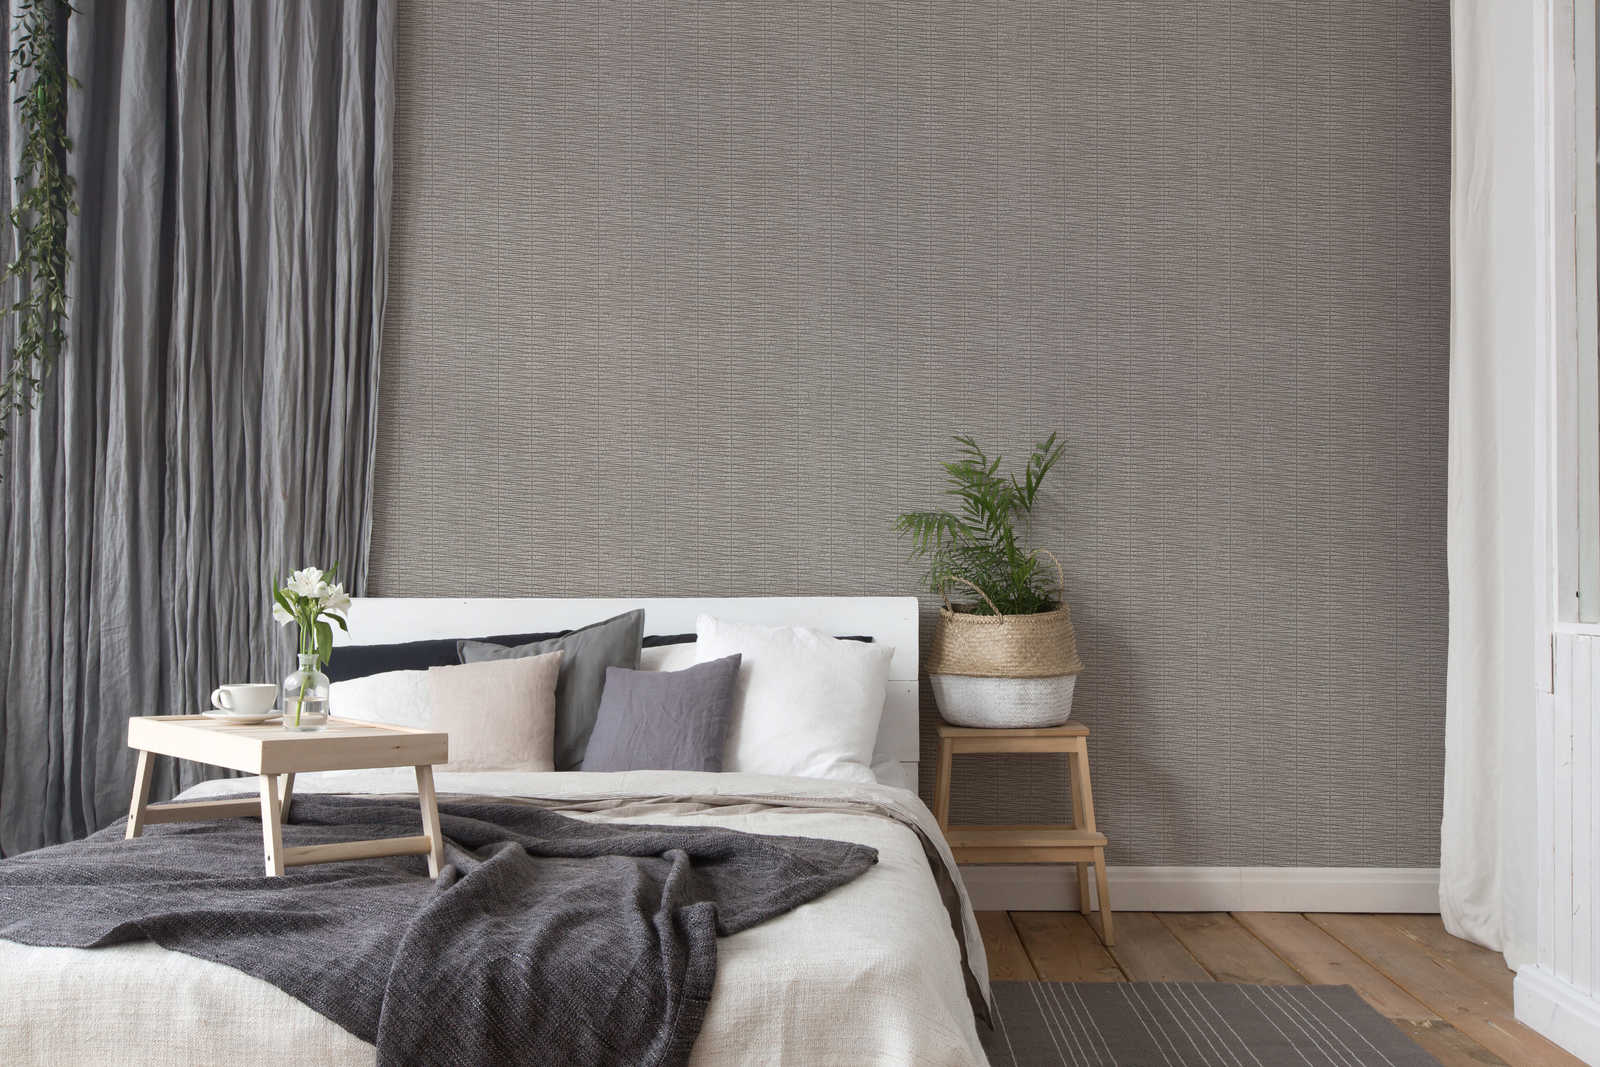             Grey wallpaper with line pattern and texture design
        